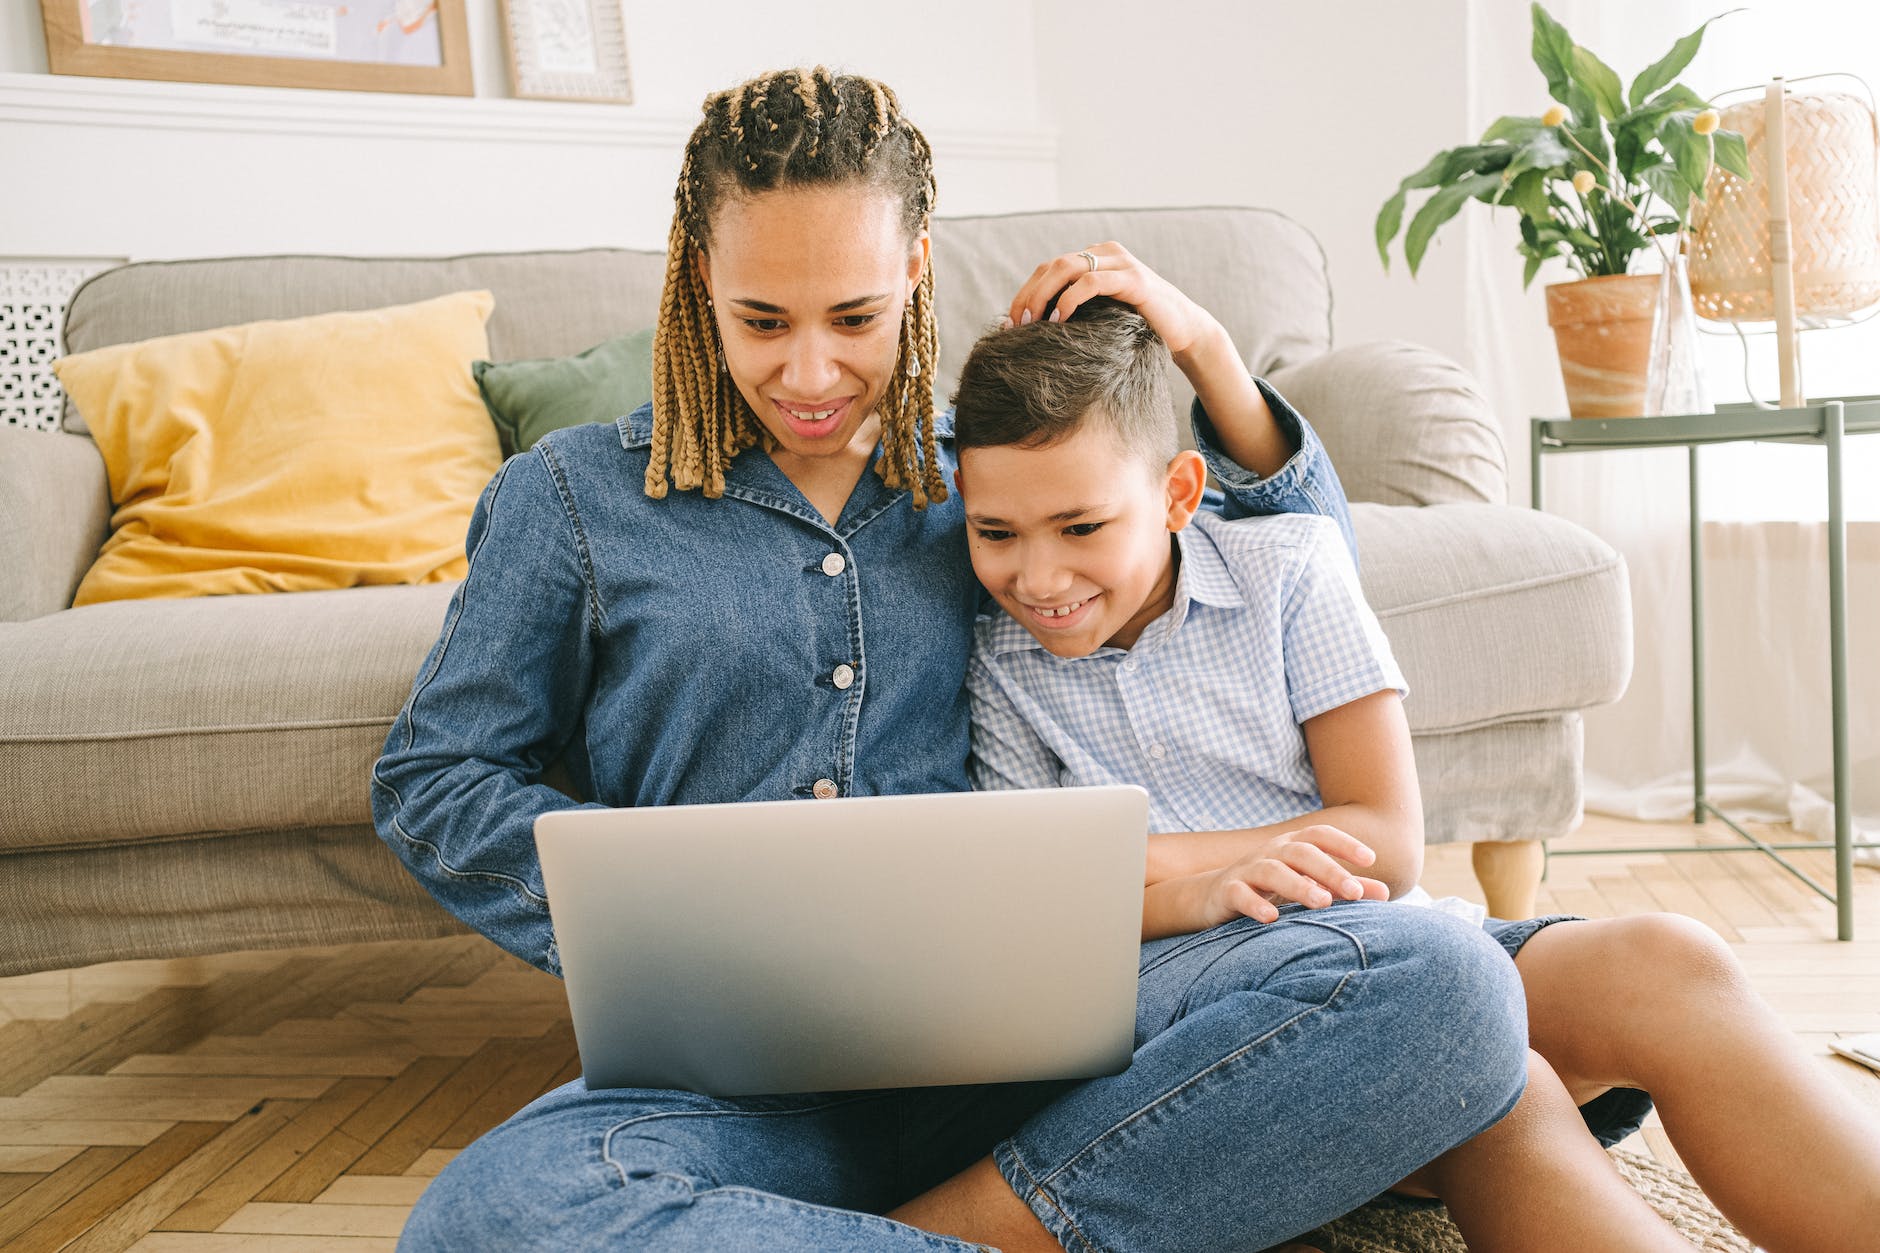 woman and young boy sitting on floor with laptop